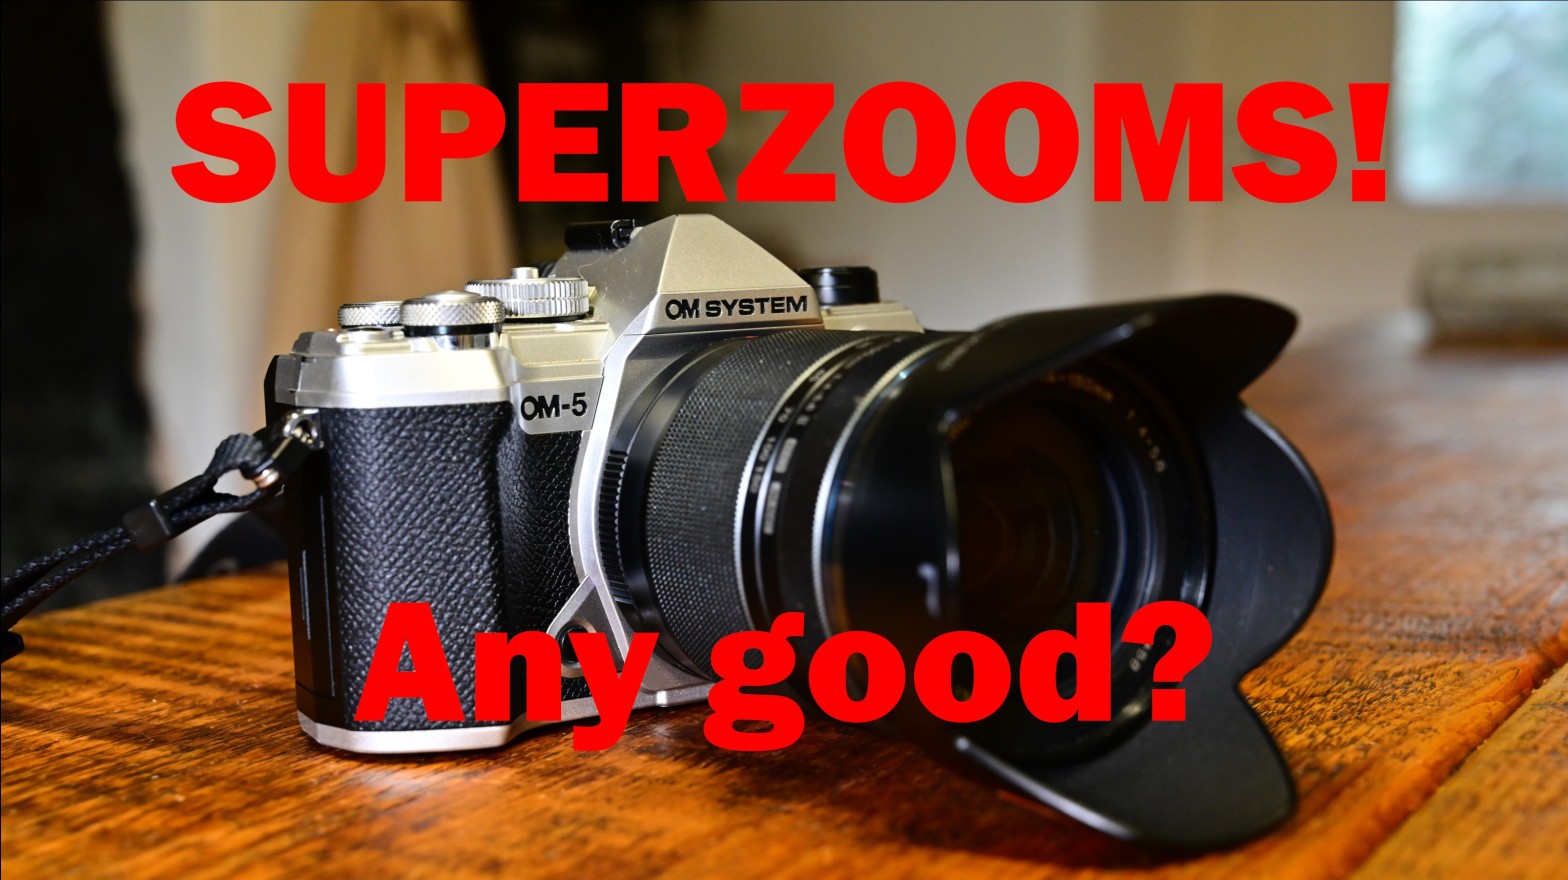 Are superzooms any good? Youtube video cover by Sam Davis Photographer